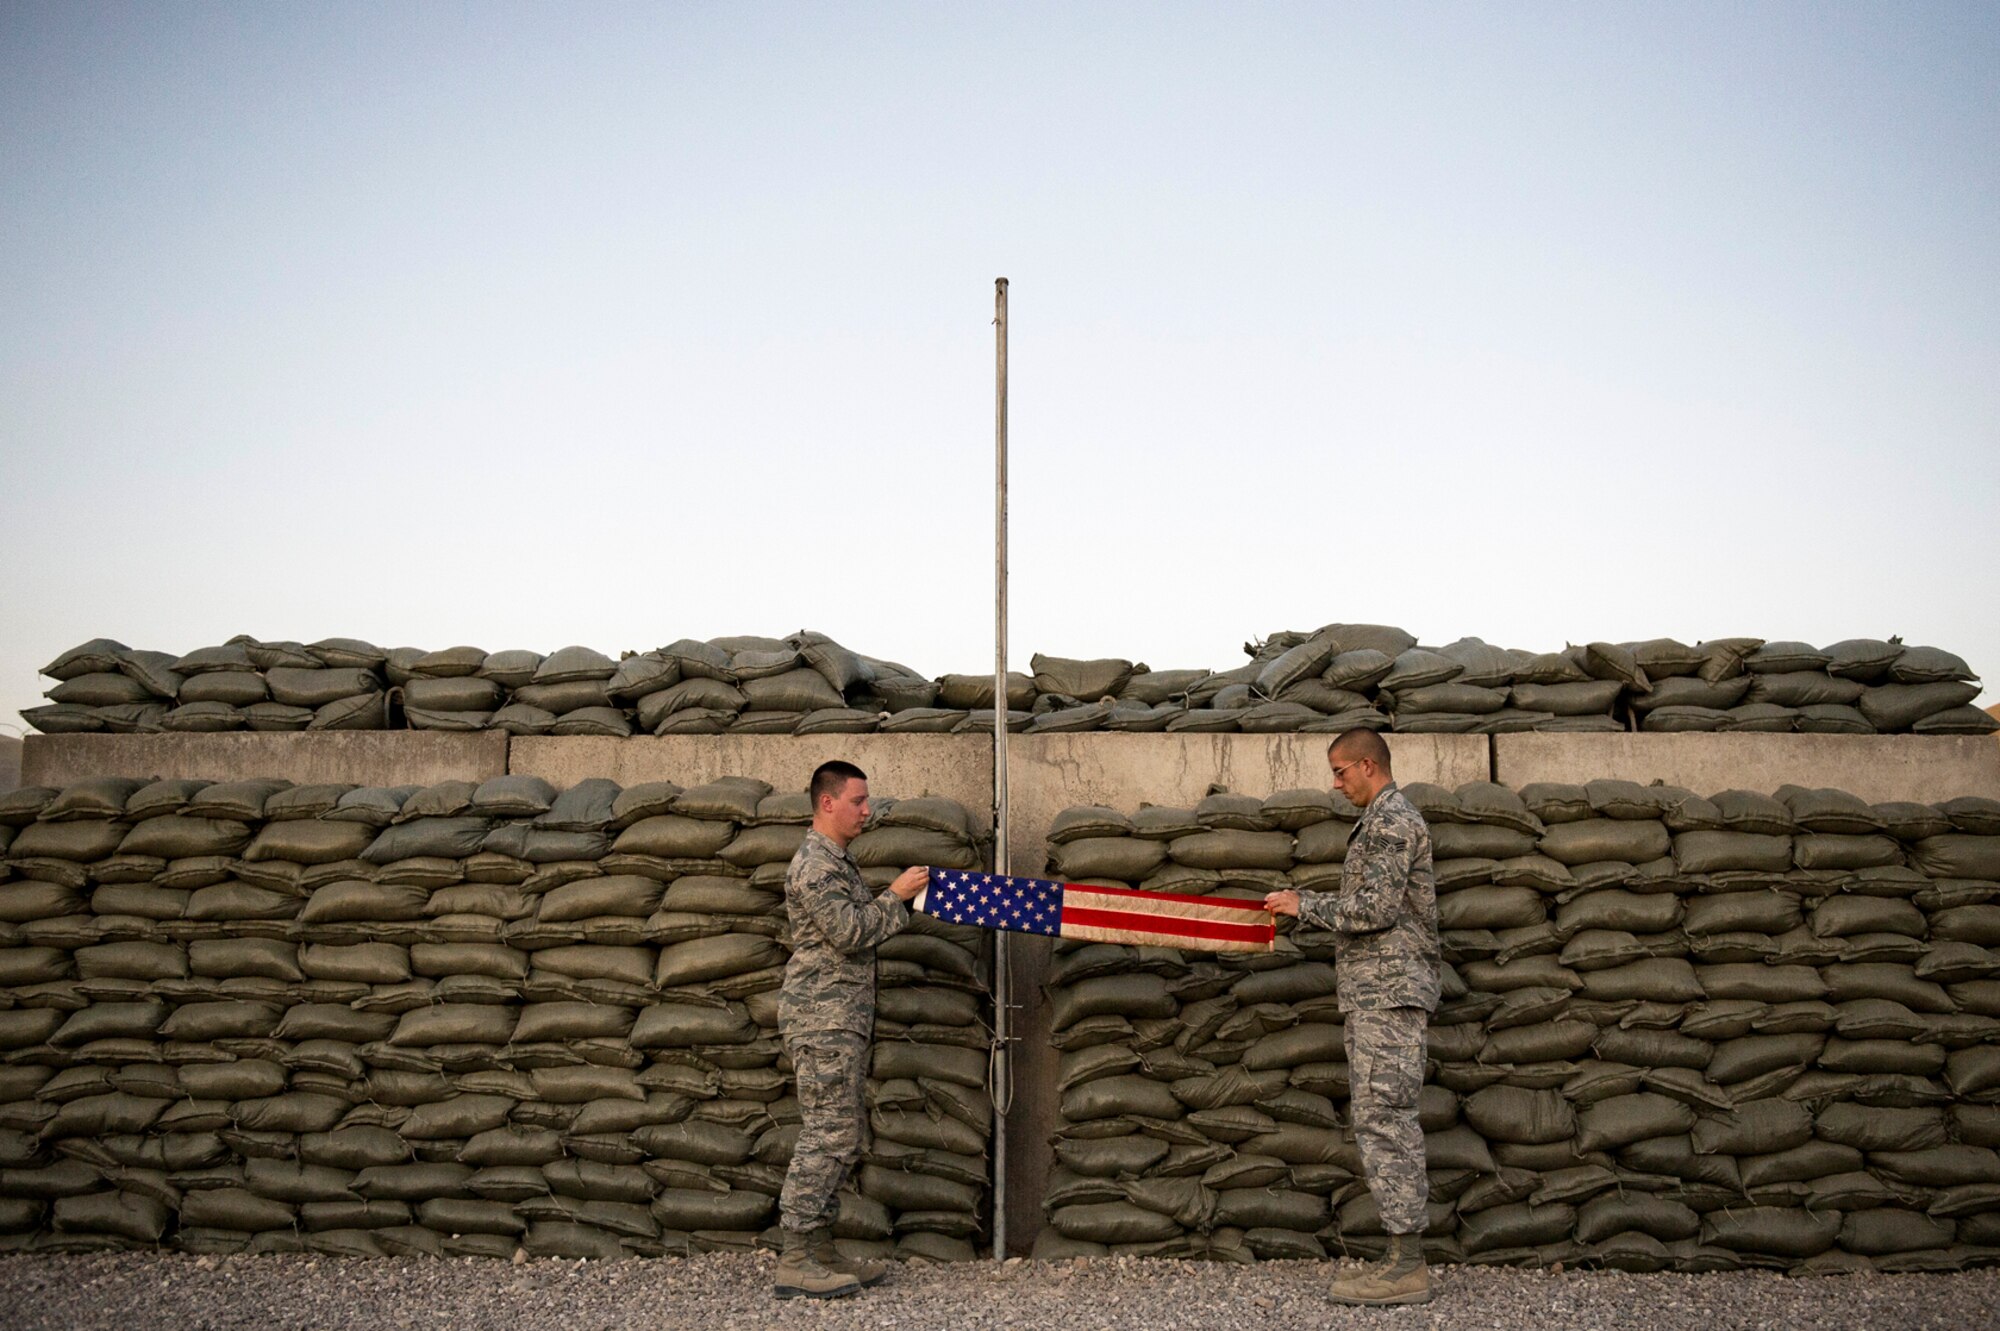 Airman 1st Class Arron Fairfax (left) and Senior Airman Ryan Adkins fold the flag during the daily retreat ceremony at Camp Etchberger, Afghanistan. Airmen at the camp perform reveille and retreat ceremonies everyday during their deployment. Both Airmen are part of Detachment 1, 73rd Expeditionary Air Control Squadron. (U.S. Air Force Photo/Master Sgt. Jeffrey Allen)